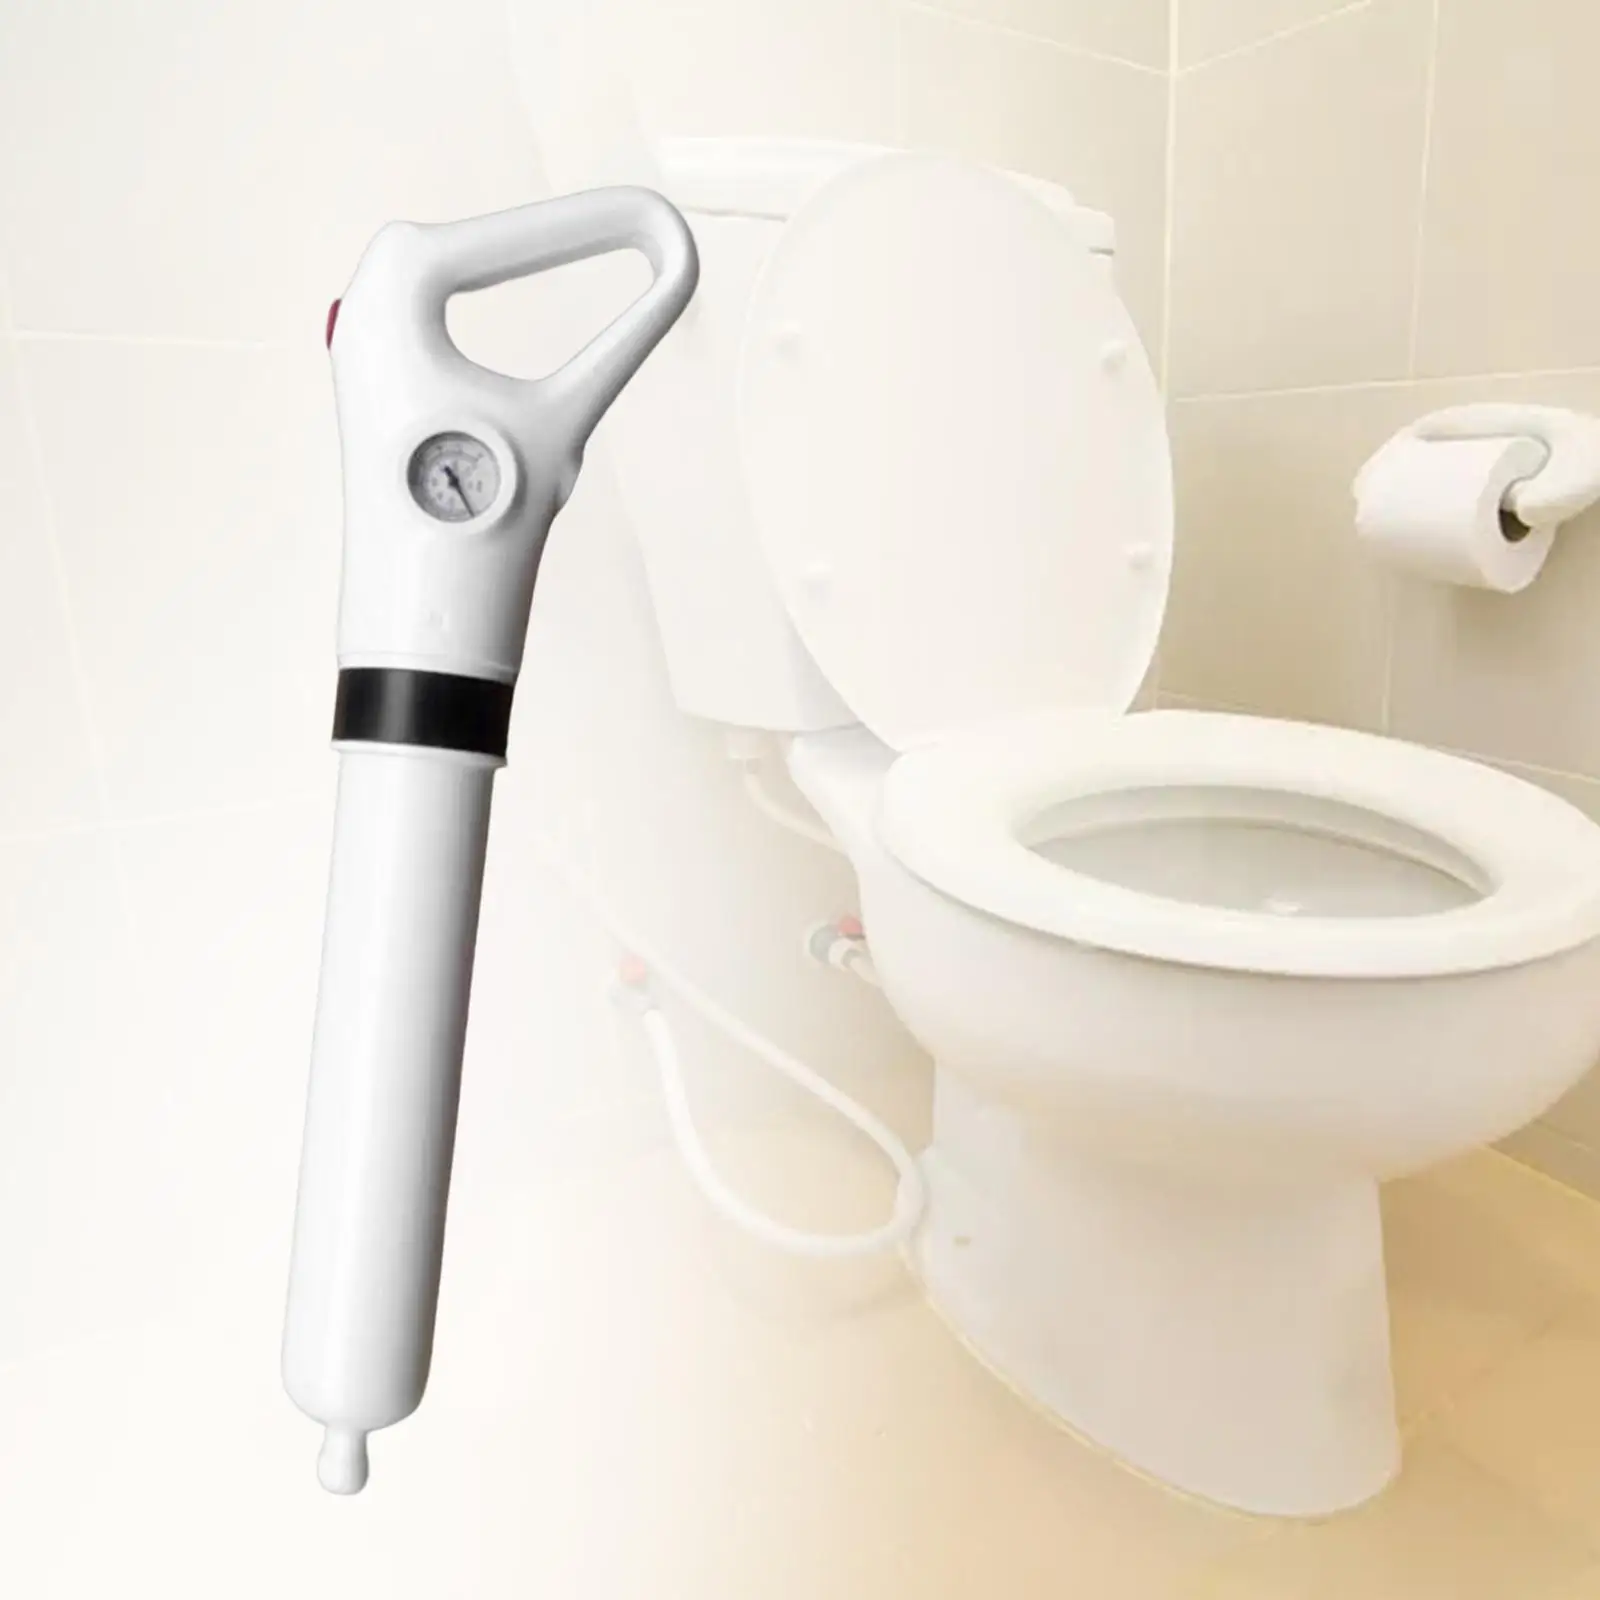 Toilet Plunger Set Toilet Unclogger Portable High Pressure Cleaning Tool Manual